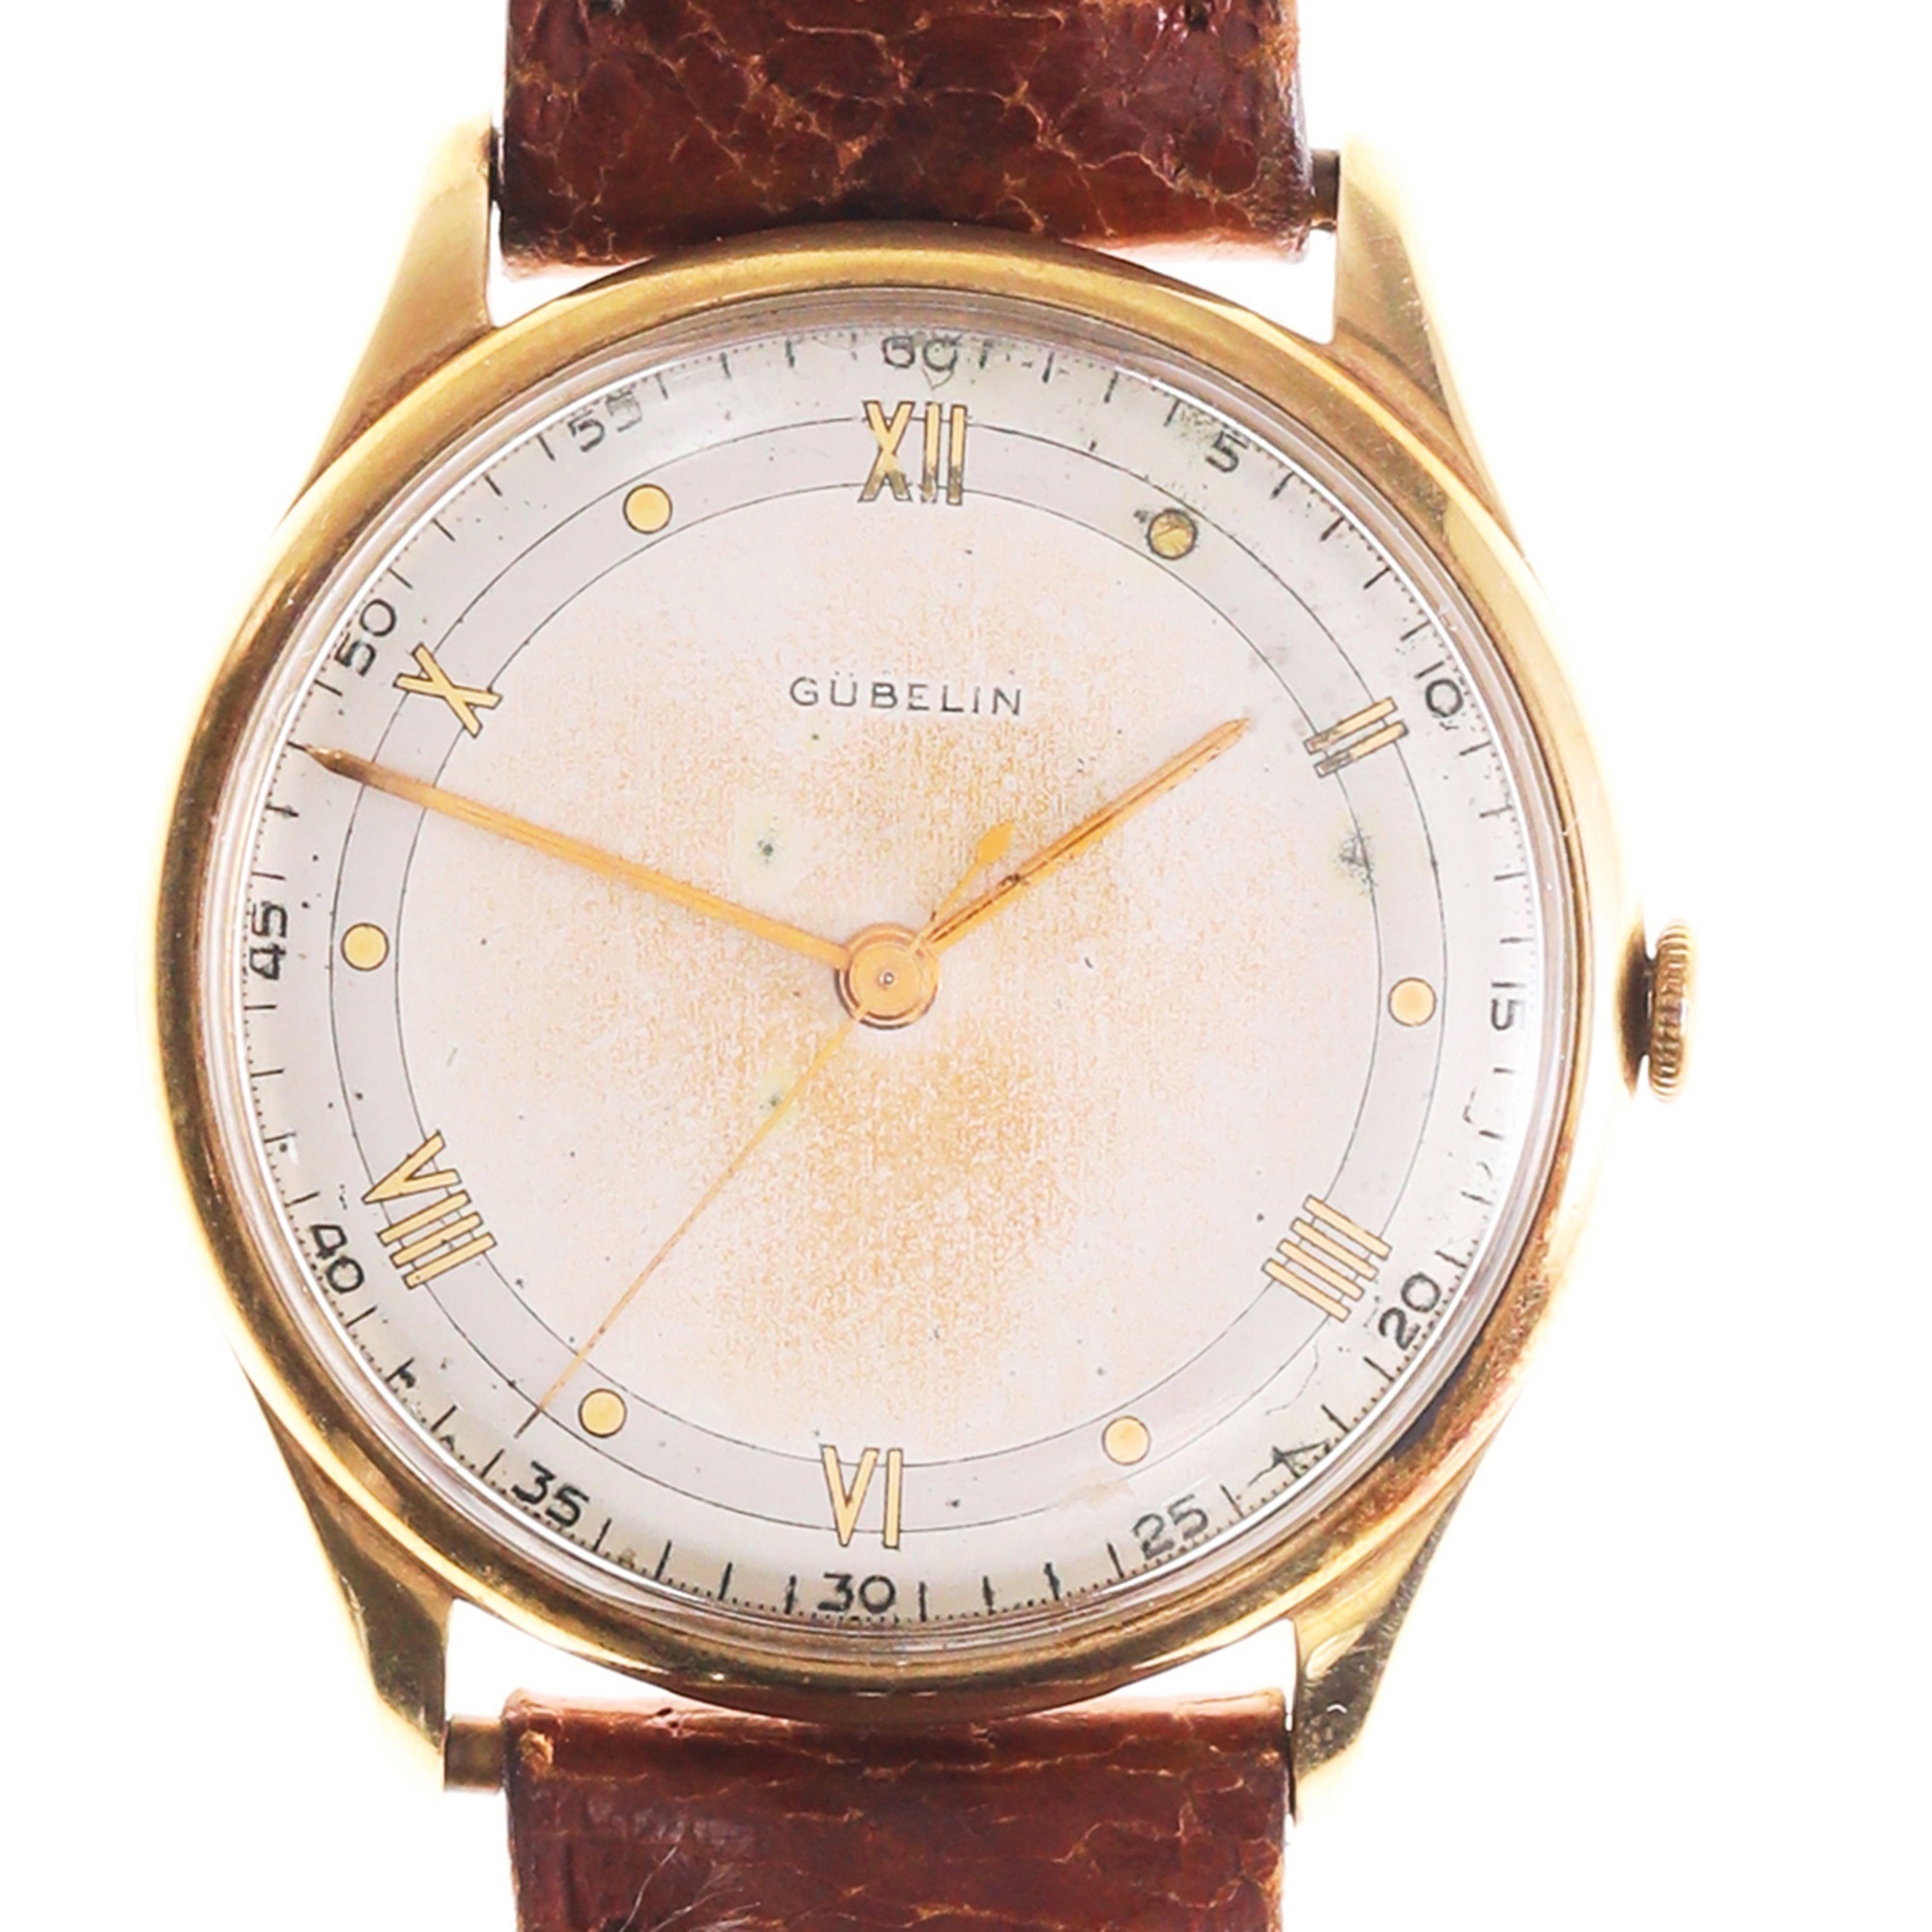 Gubelin 14K Gold Mens Wristwatch with Tropical Dial